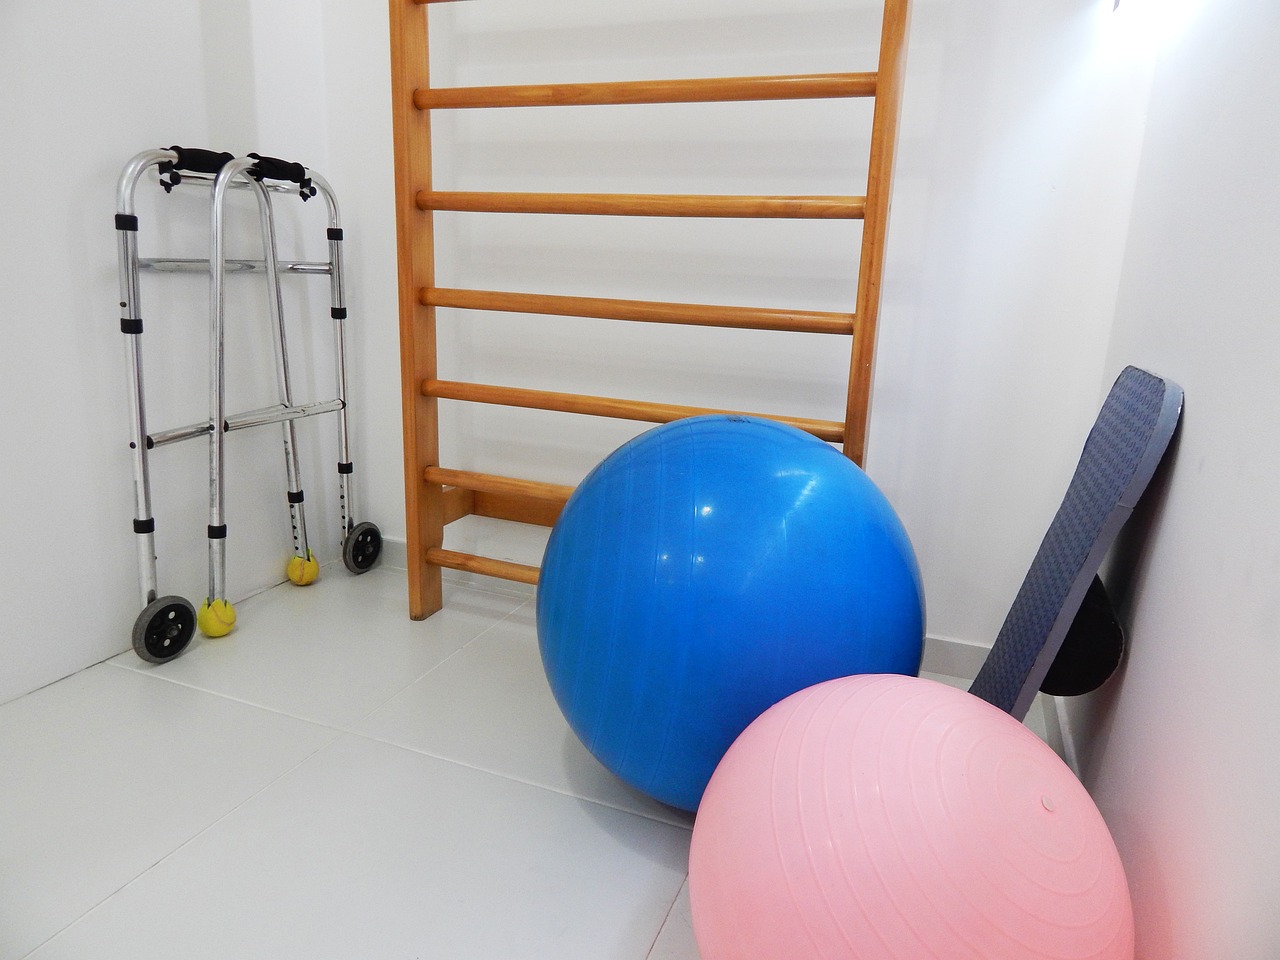 Finding the Perfect Physiotherapist Near Me